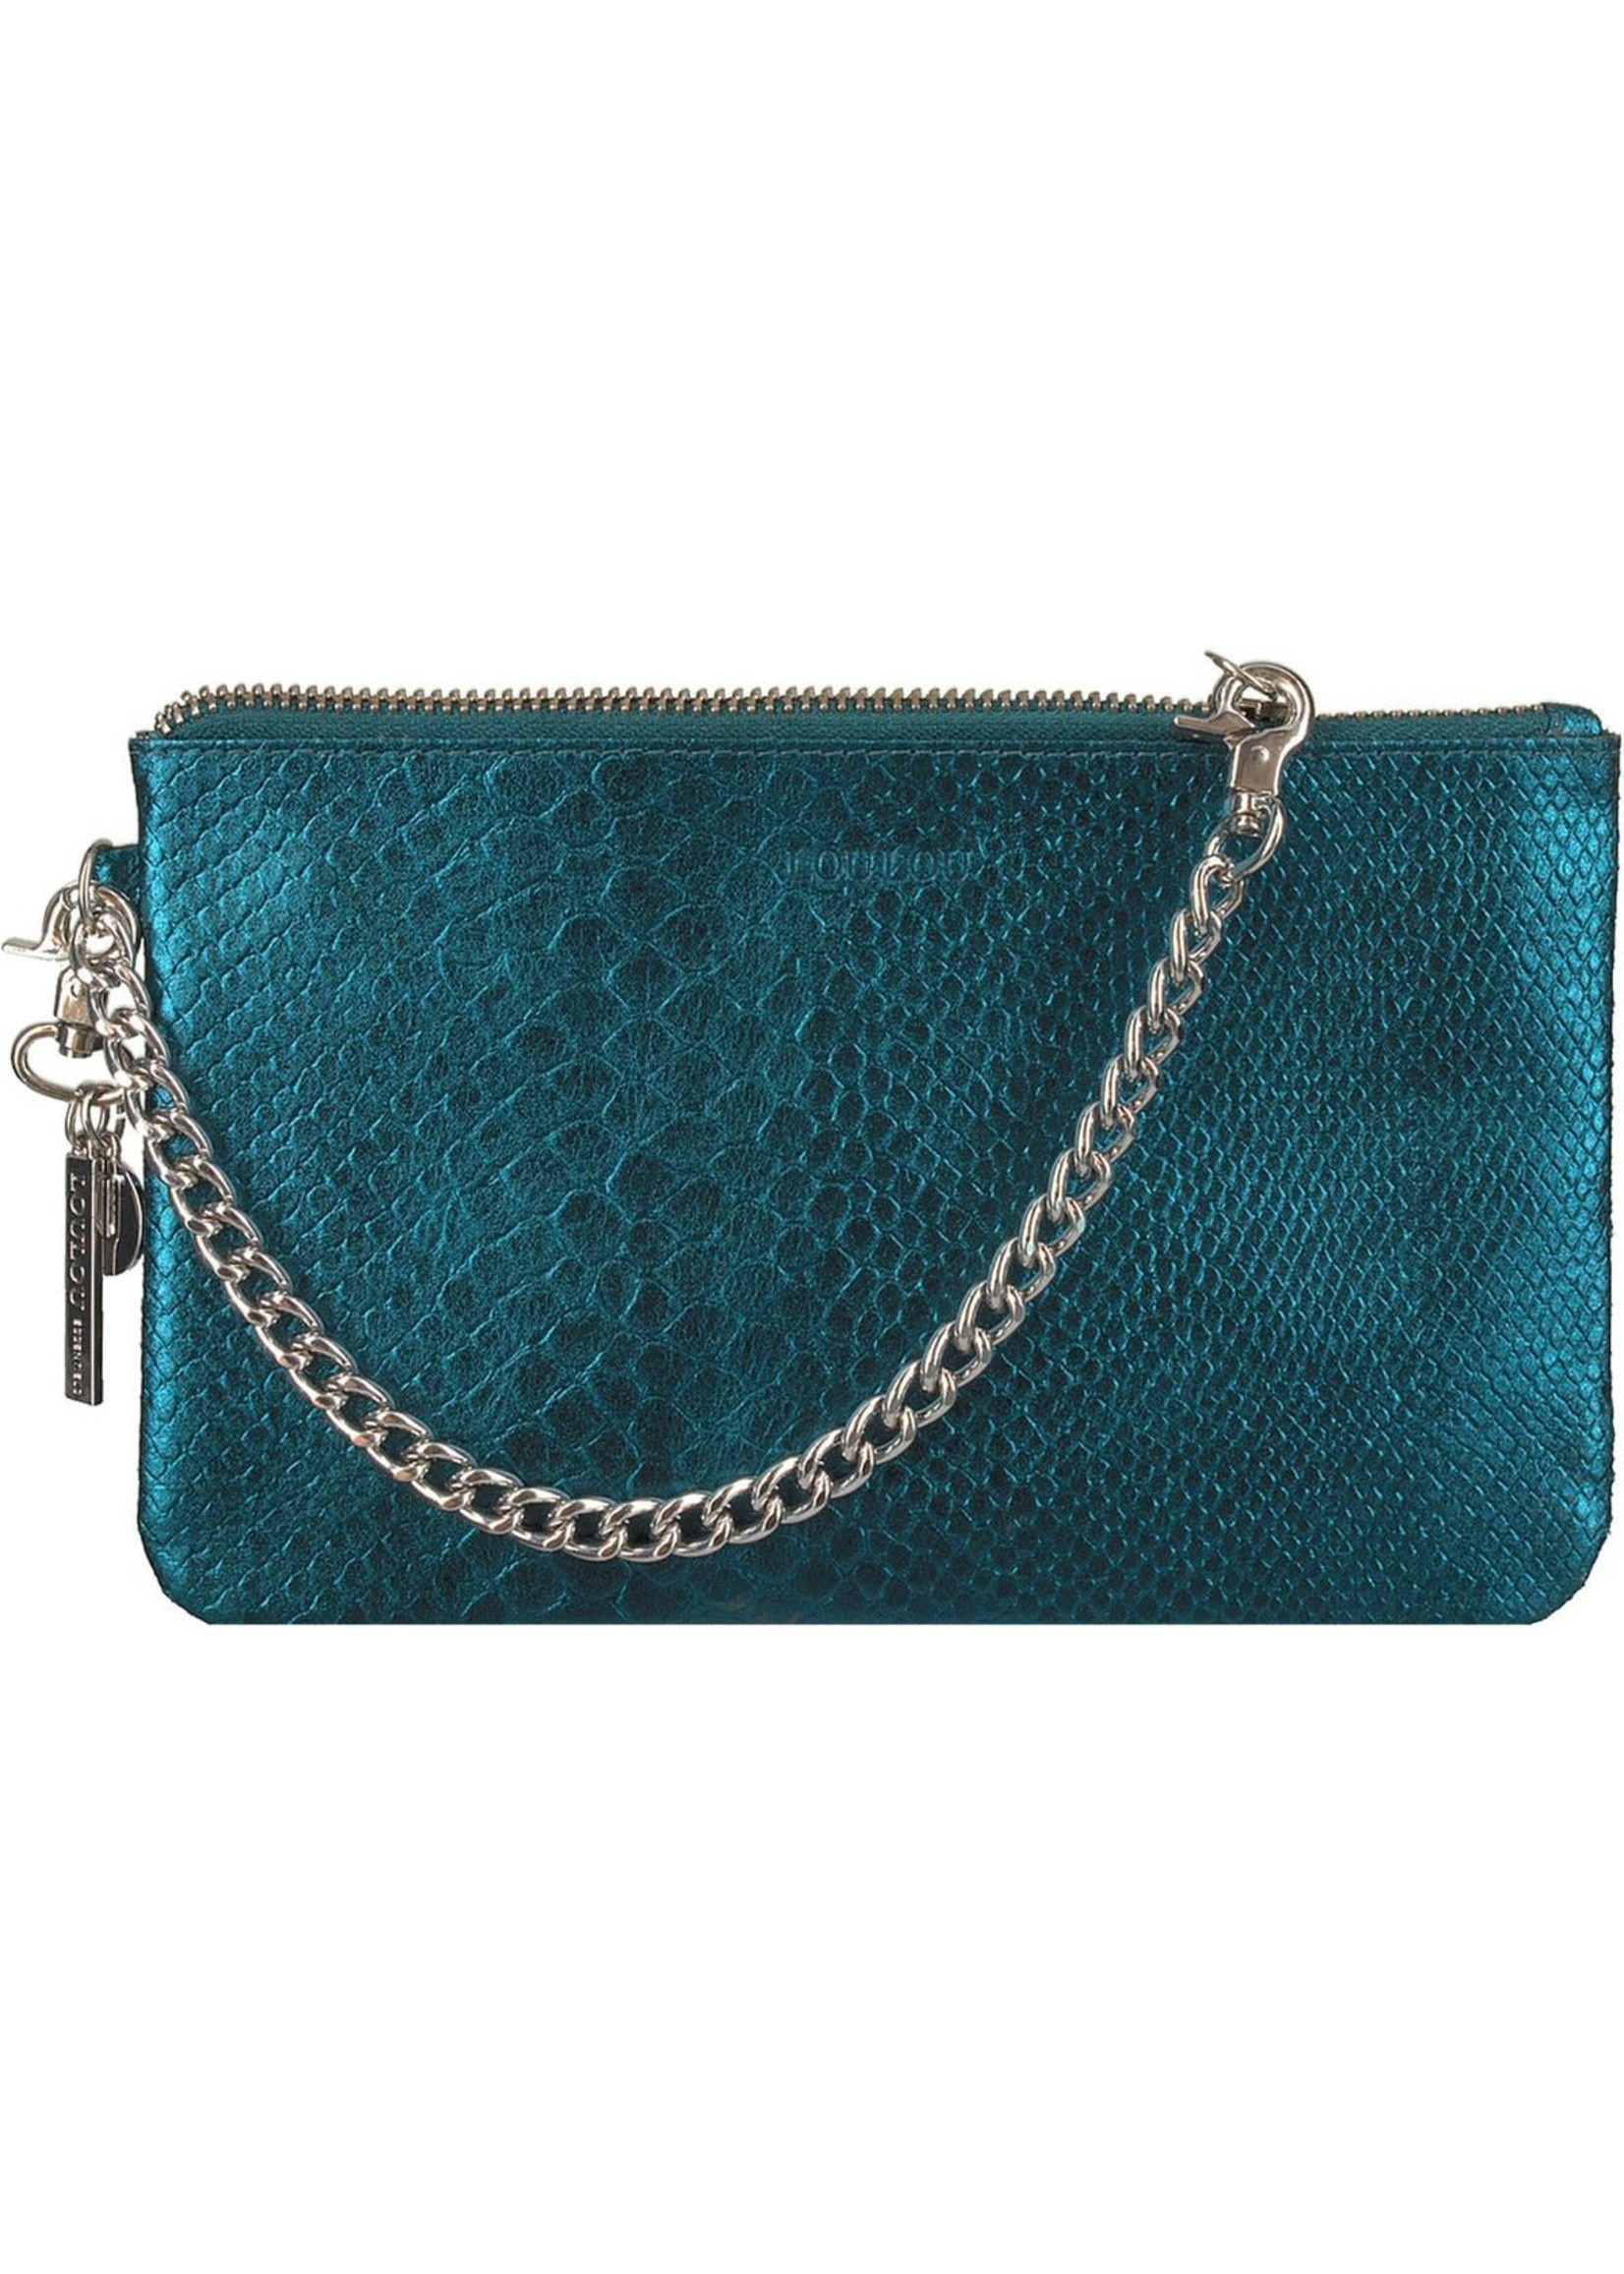 LouLou LouLou Essentiels - Portemonnee - Sirens of the sea - blauw